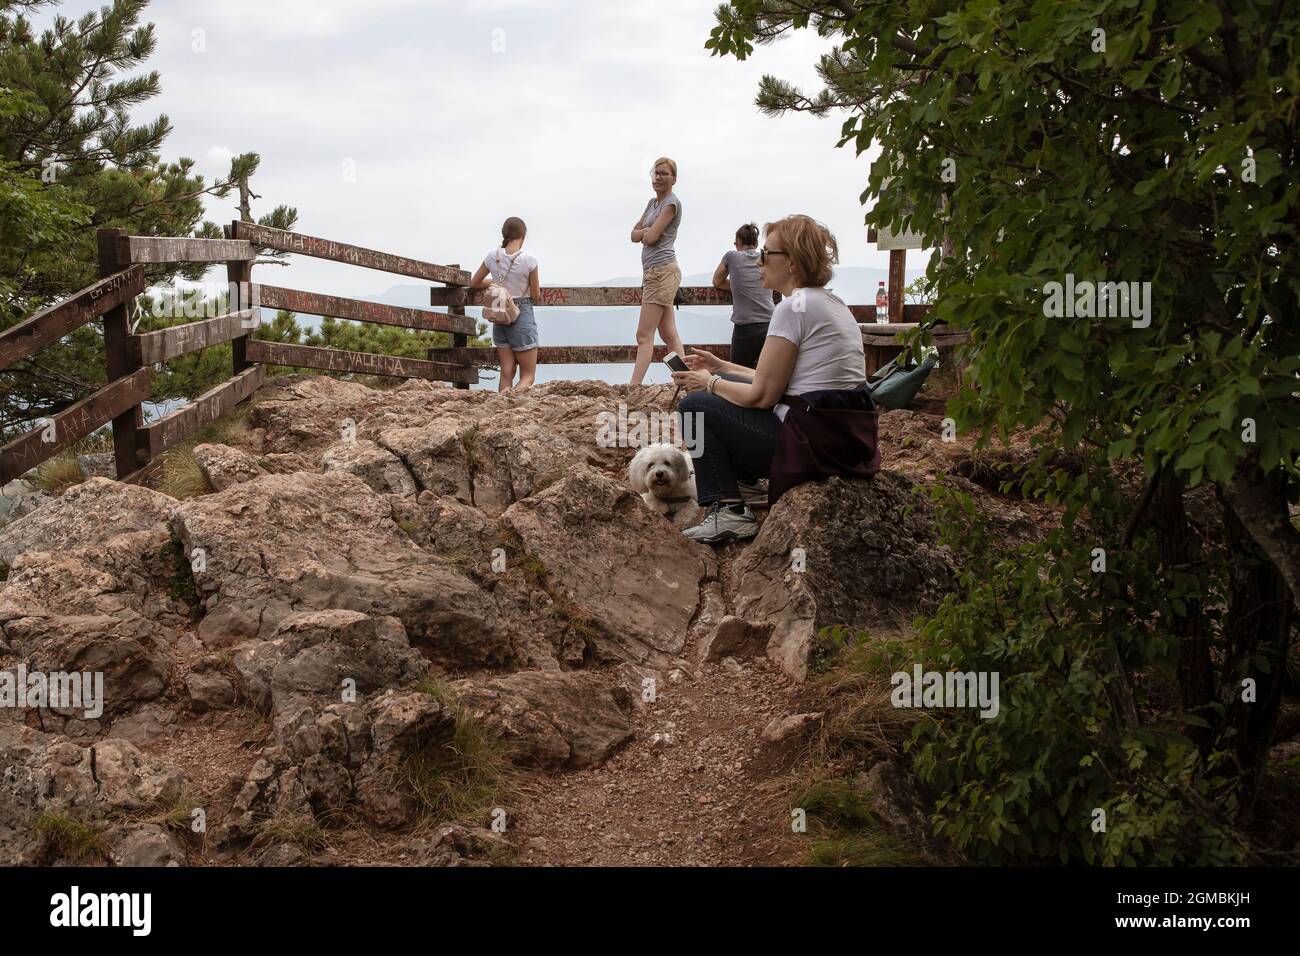 Serbia, Jul 15, 2021: Hikers resting at one of the lookouts of Mountain Tara Stock Photo